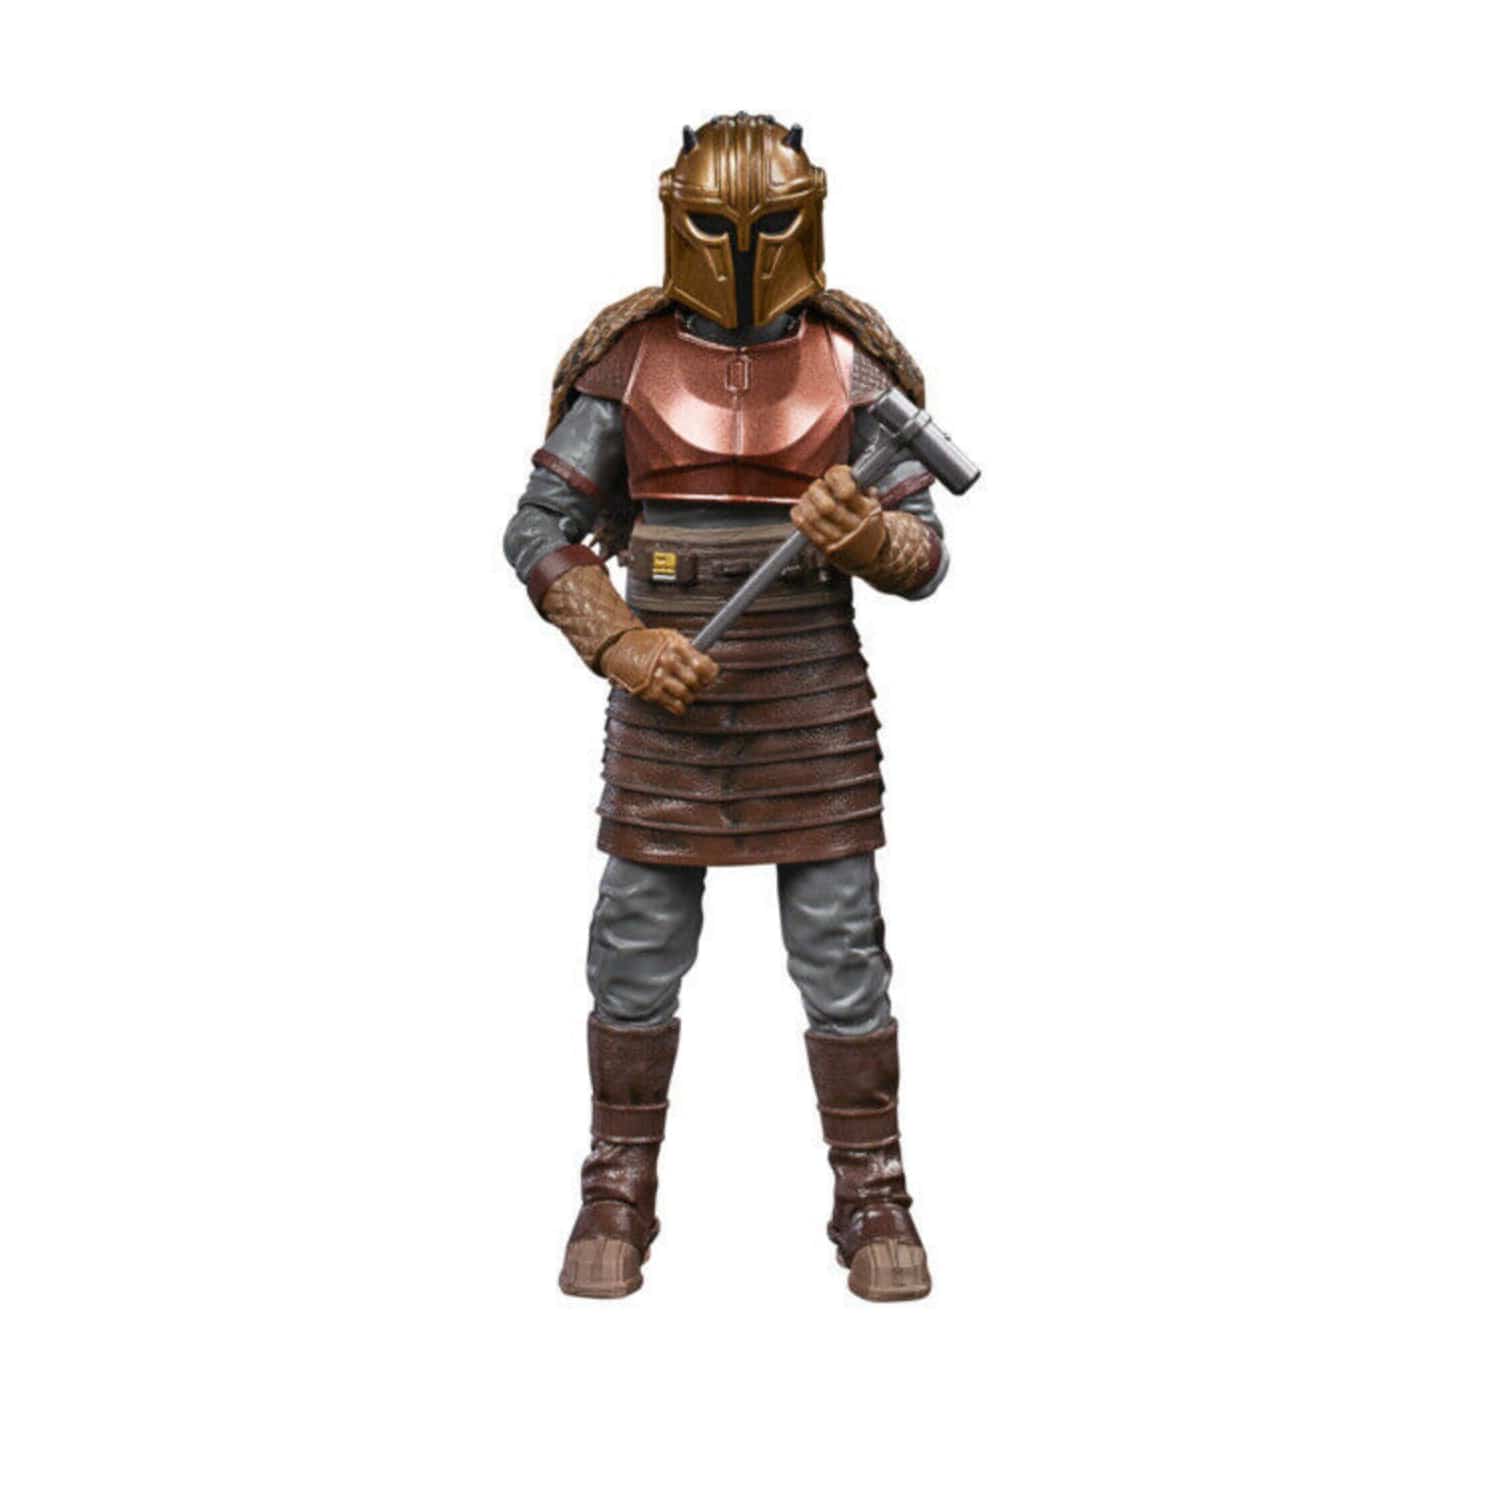 Star Wars The Black Series The Armorer (The Mandalorian) 6" Inch Action Figure